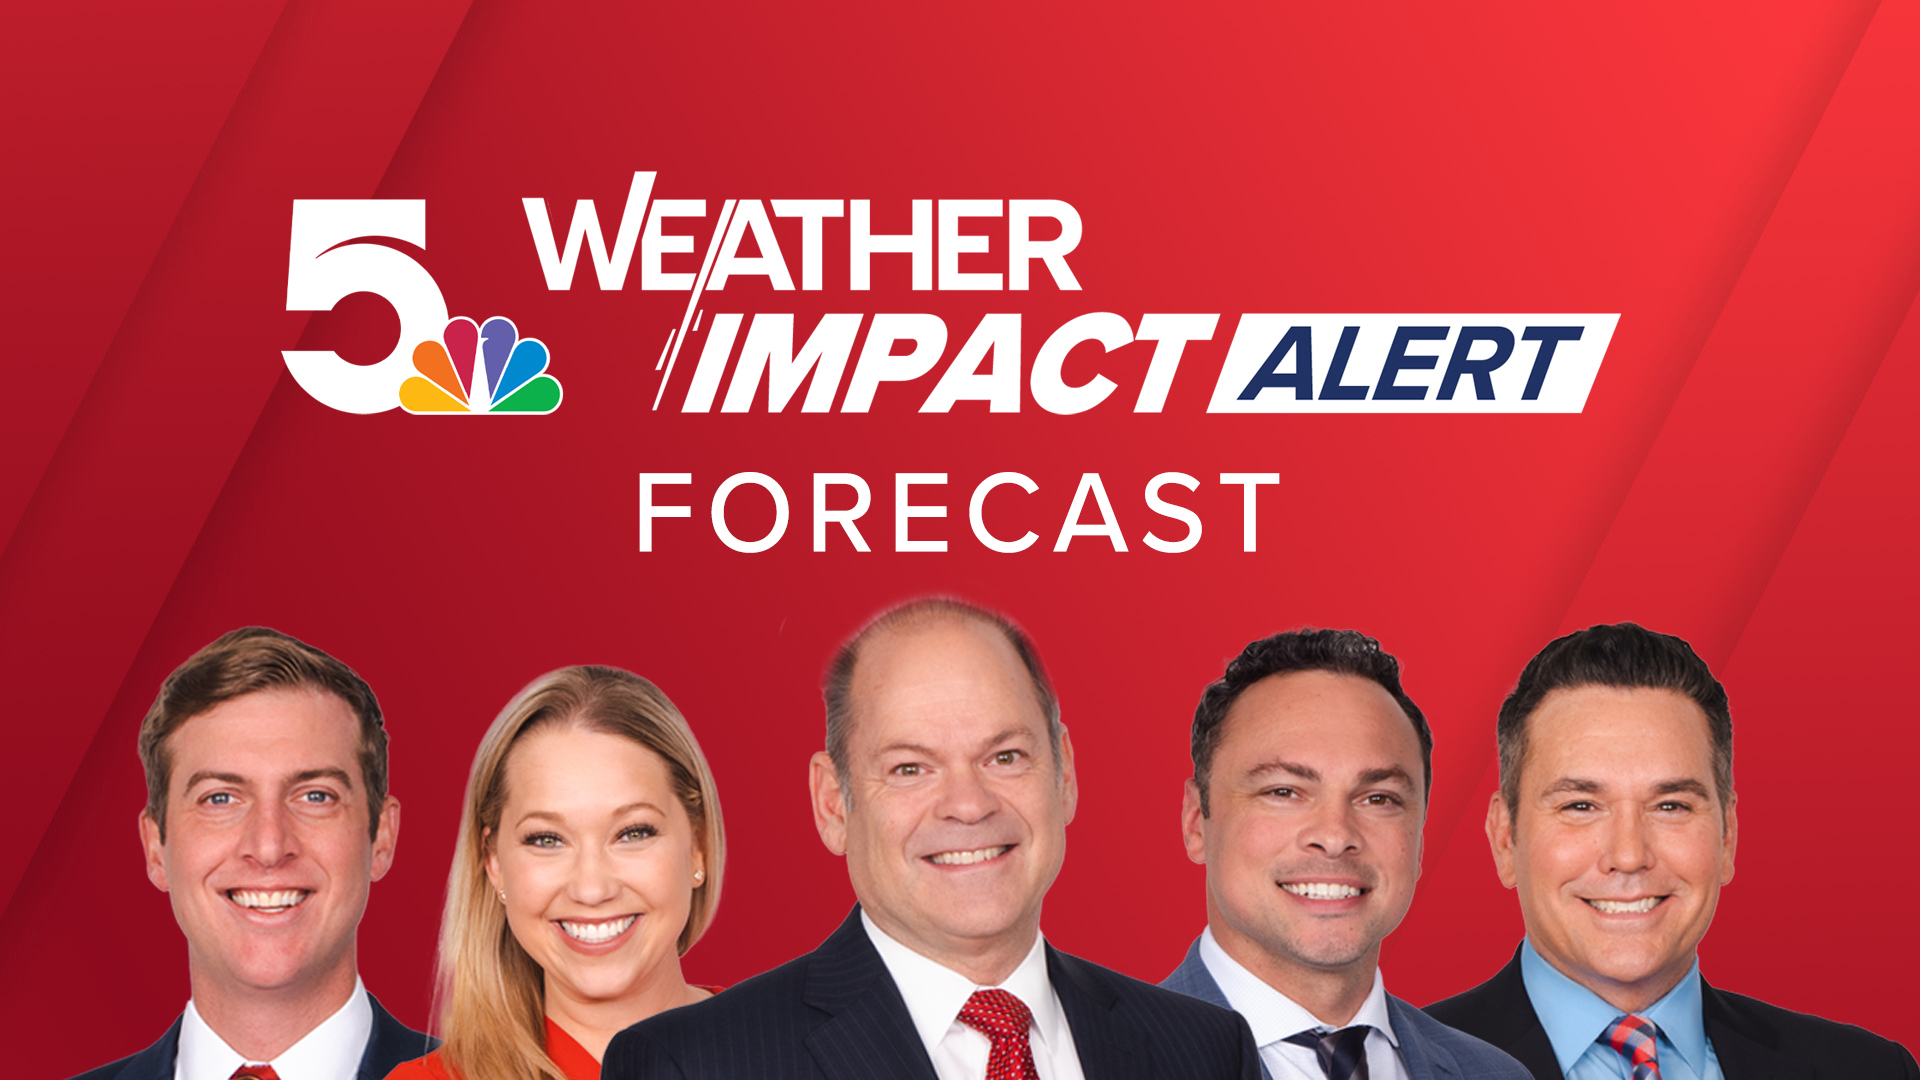 The Weather Impact Team has issued Weather Impact Alert Days for later Wednesday and all of Thursday.